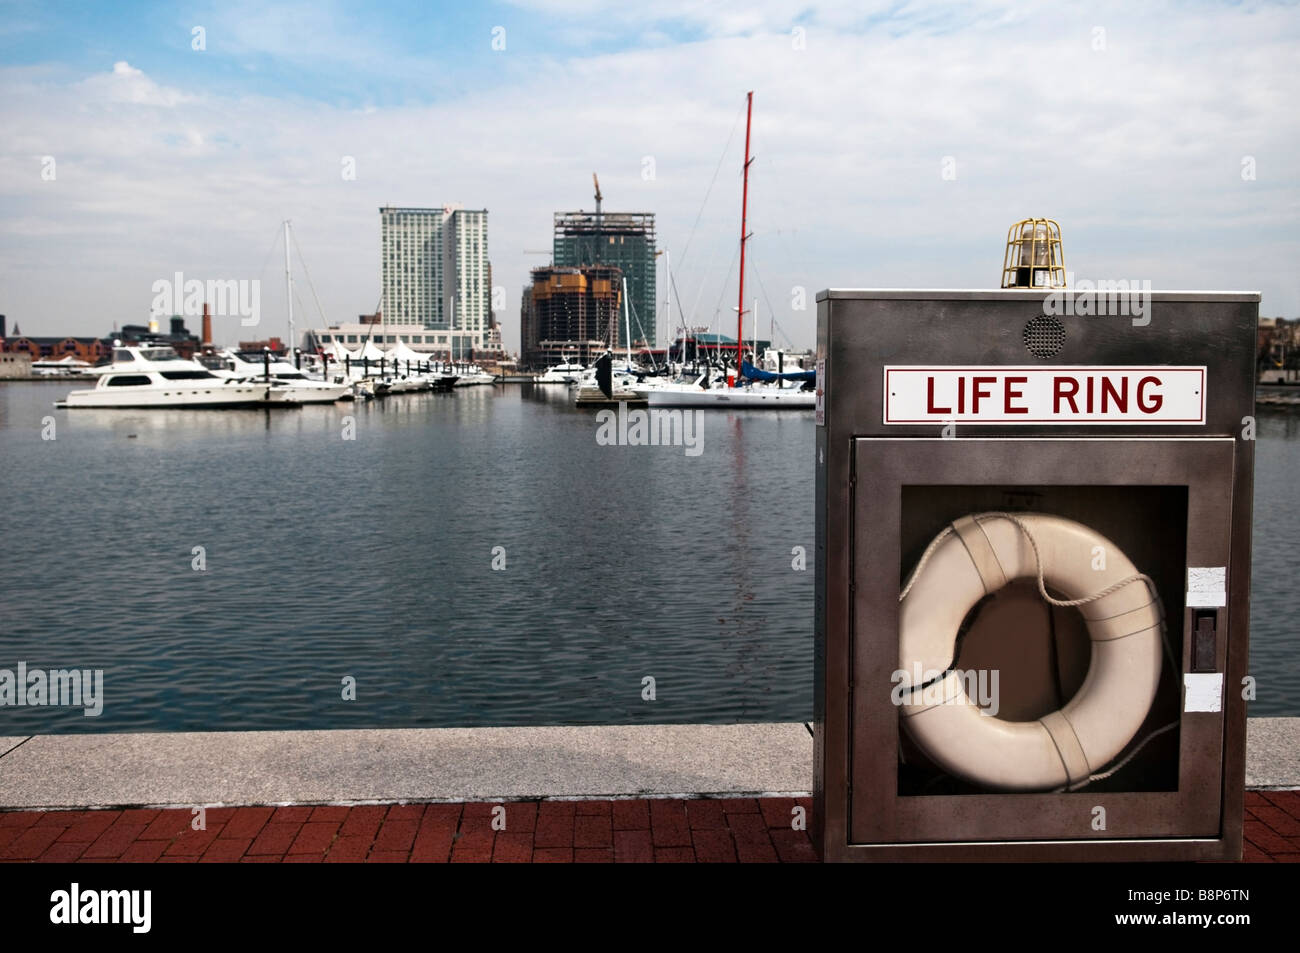 Life preserver on the banks of the Chesapeake Bay, Baltimore Maryland Stock Photo